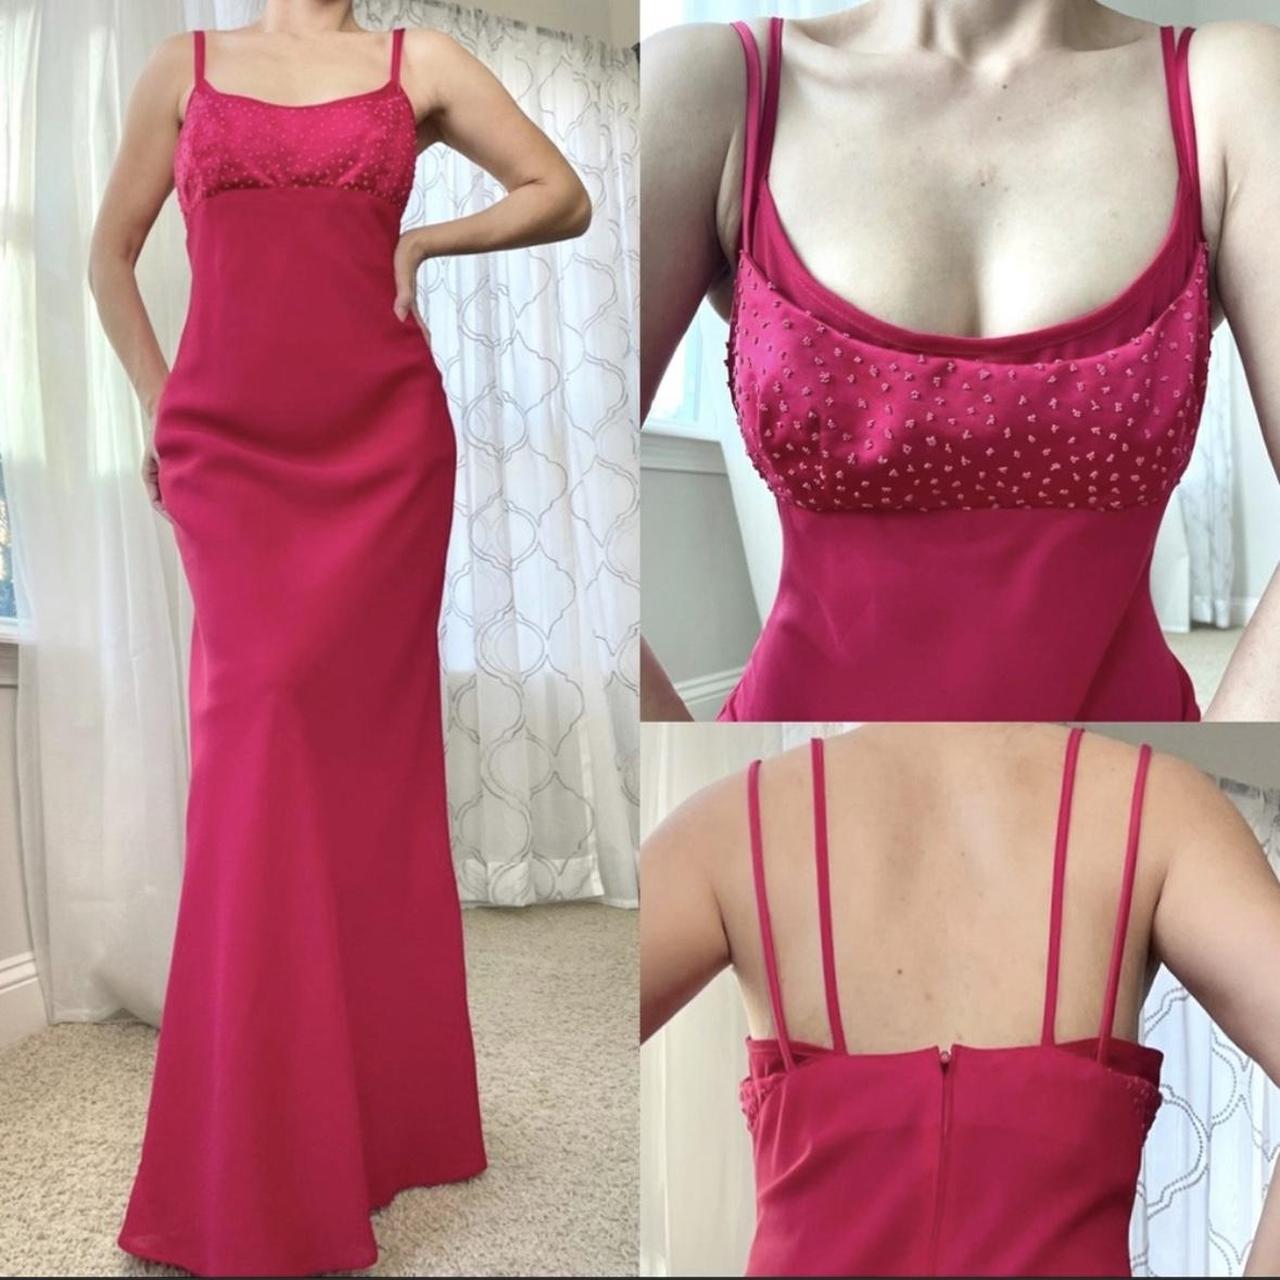 Women's Red and Pink Dress